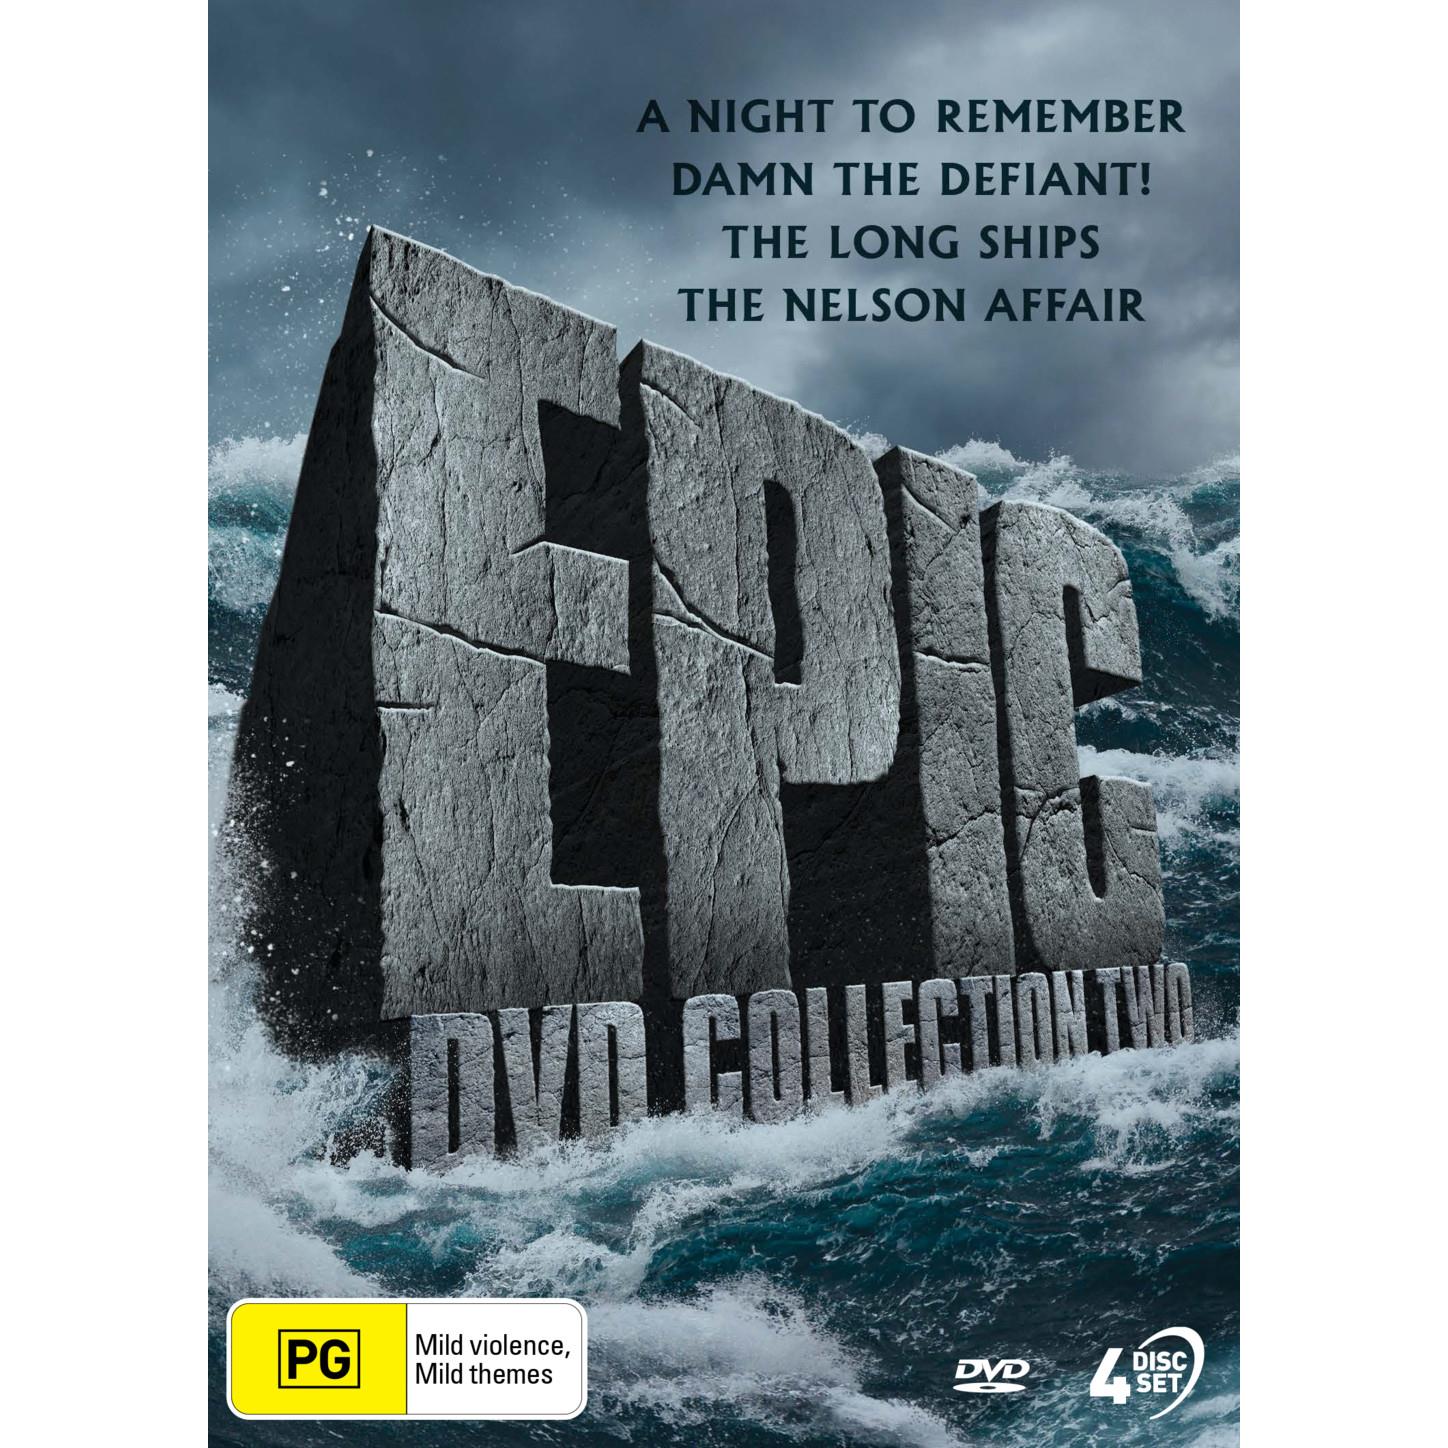 epic dvd collection 2 (a night to remember/damn the defiant!/the long ships/the nelson affair)